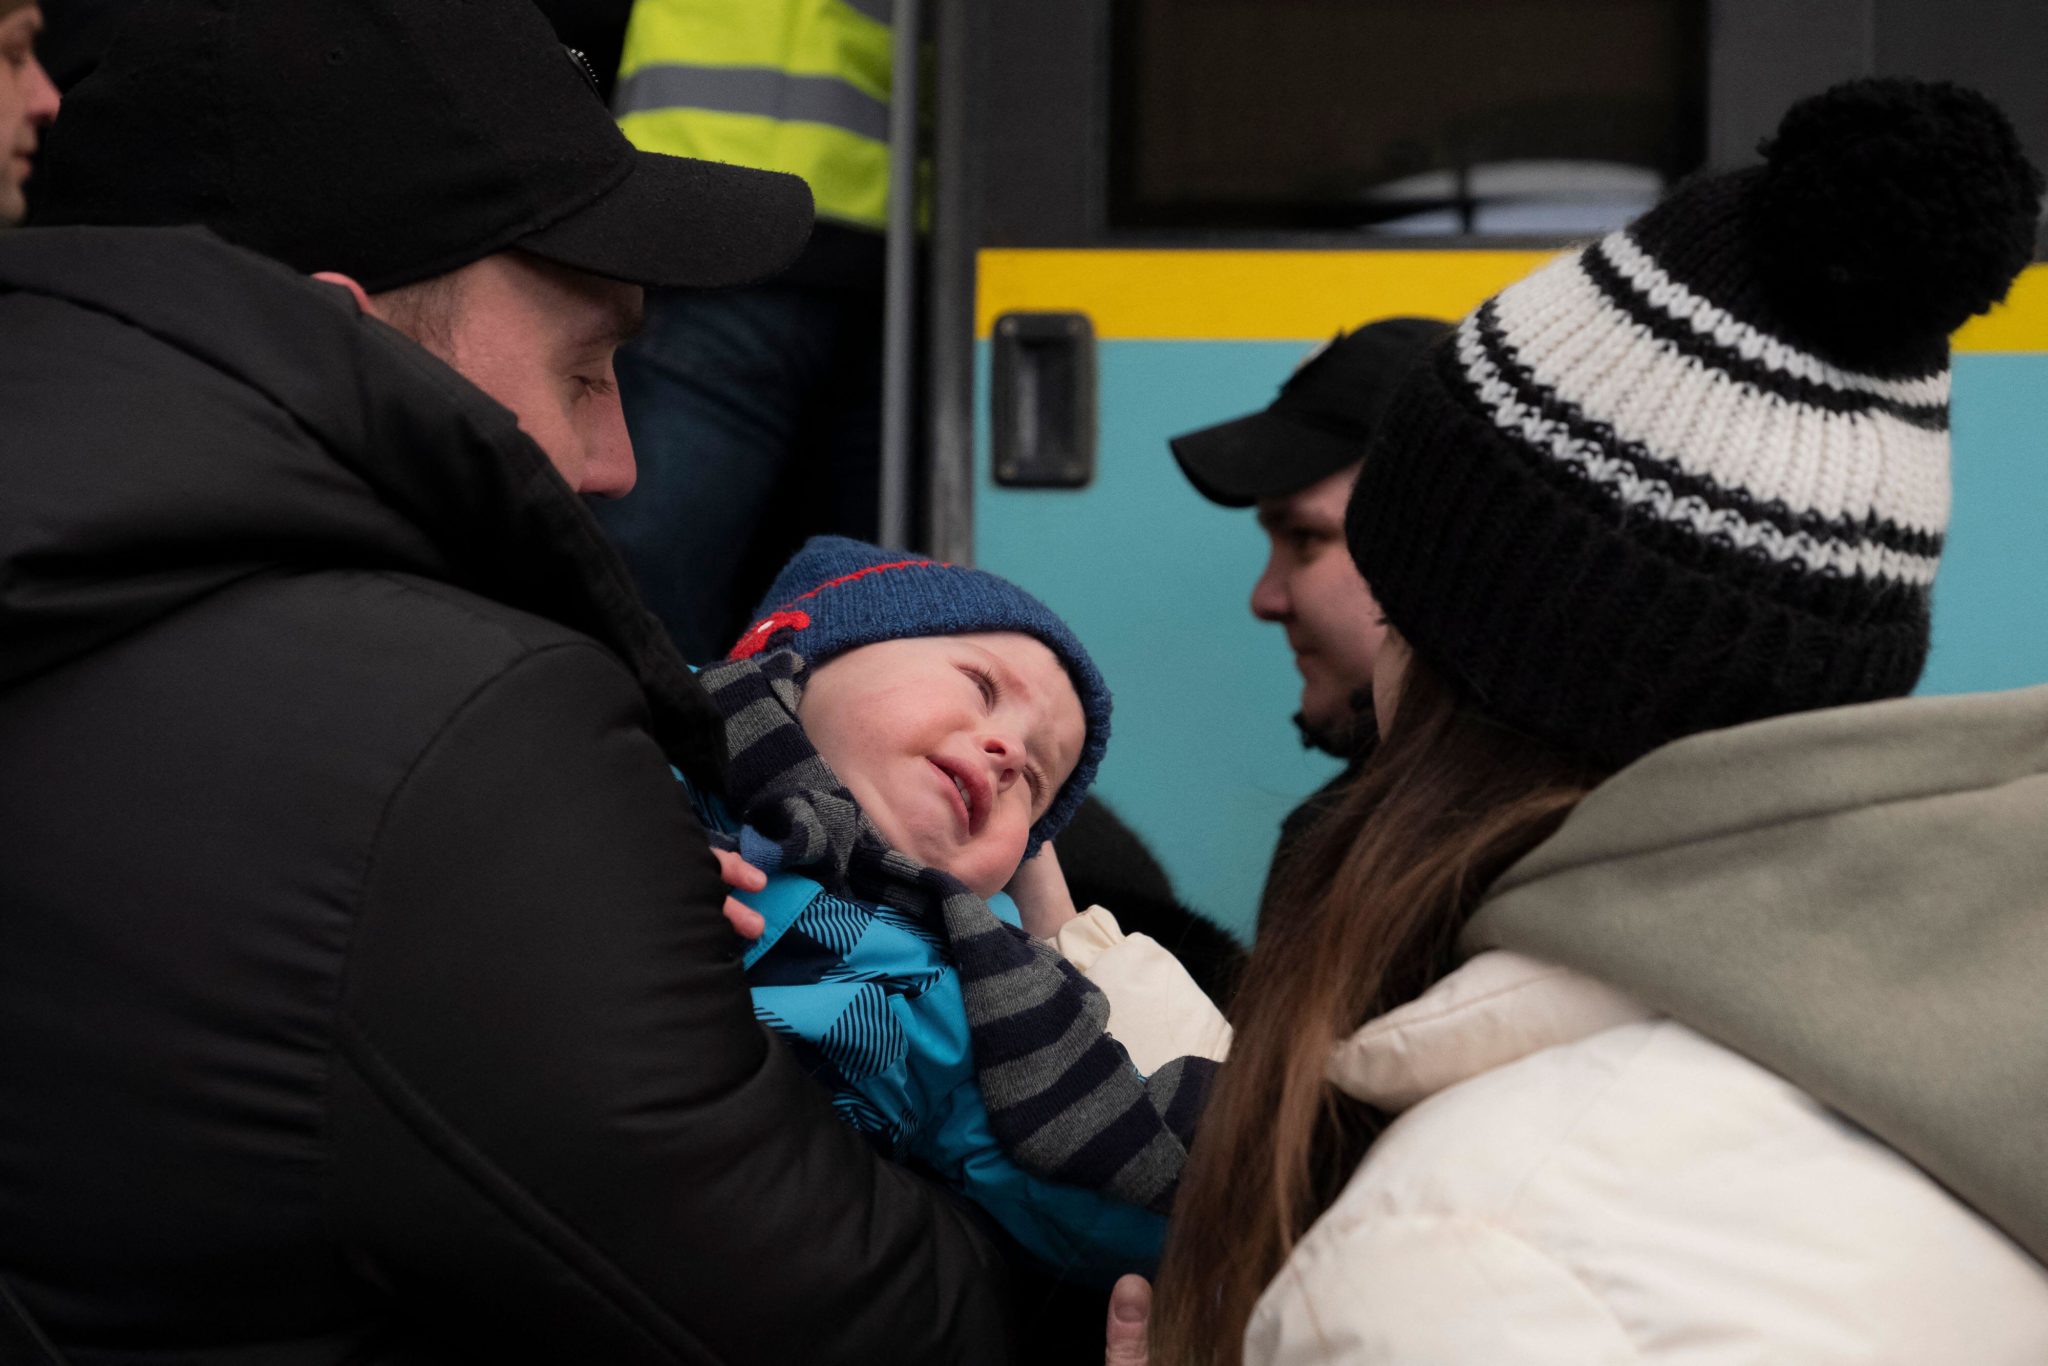 A Ukrainian father holds his child at a train station in the westernmost city of Lviv, near the Ukrainian-Polish border, to escape the ongoing Russian military conflict on March 1st 2022